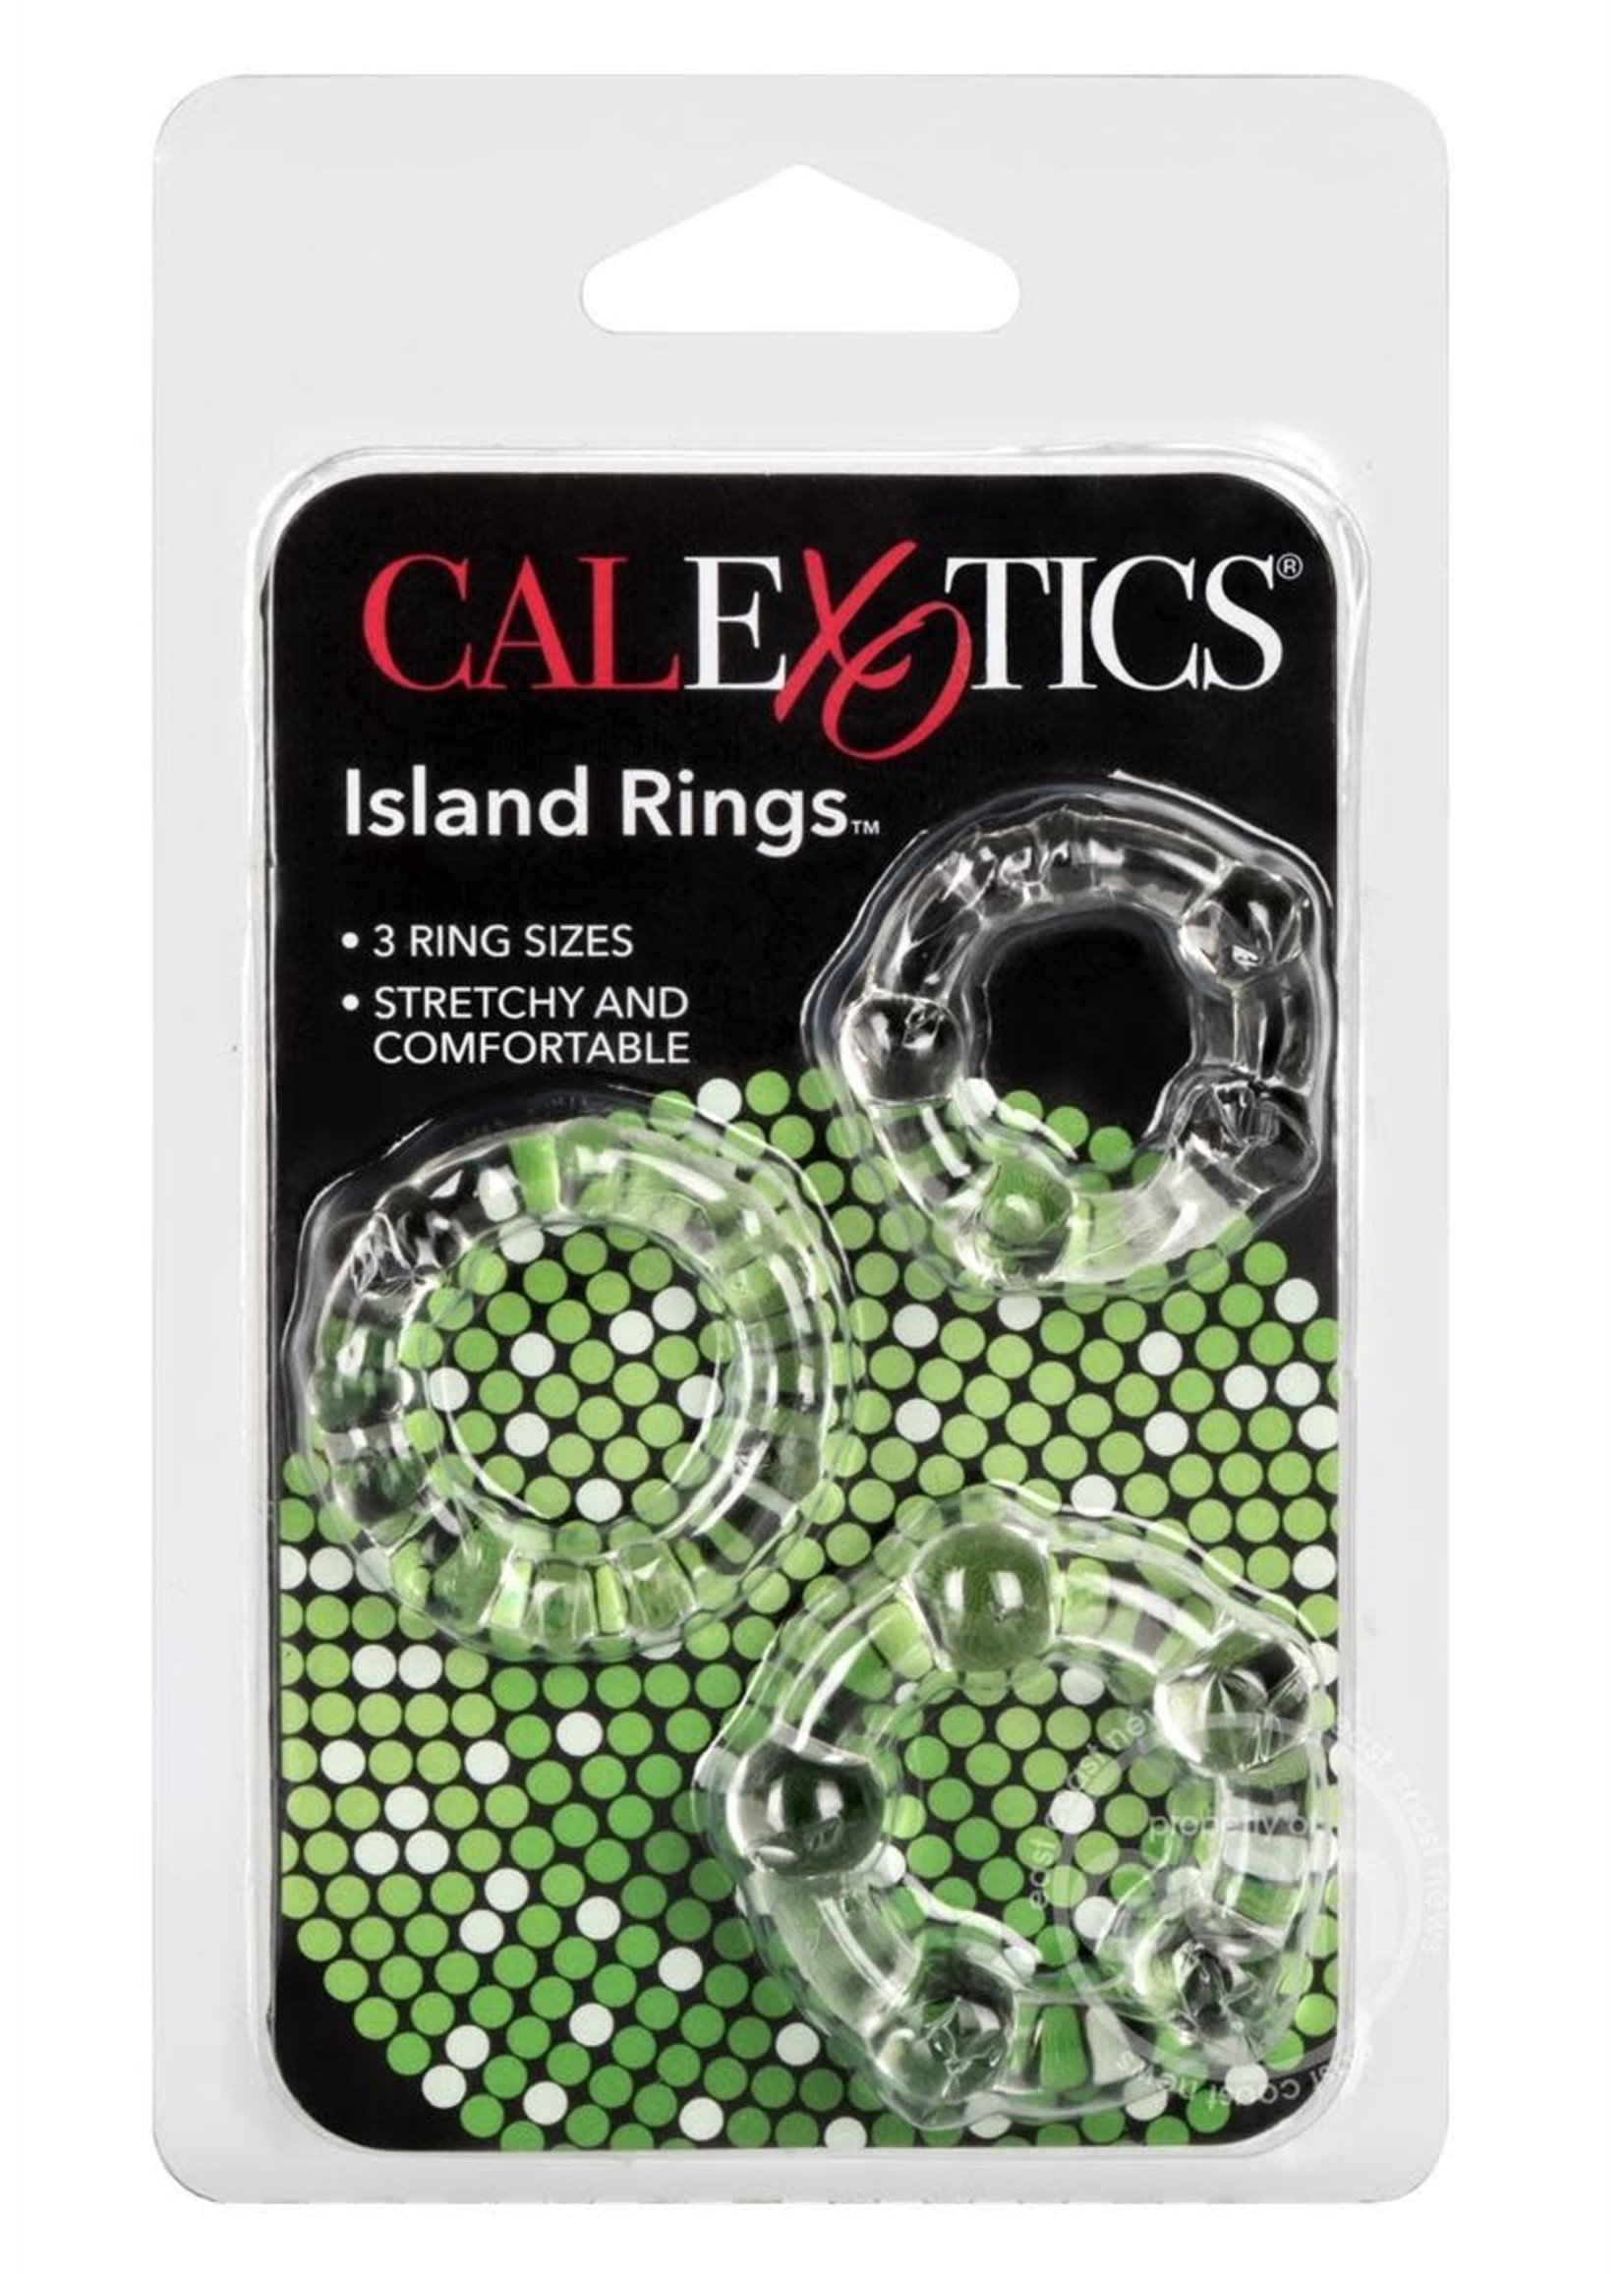 CalExotics Silicone Island Rings Clear 3 Sizes